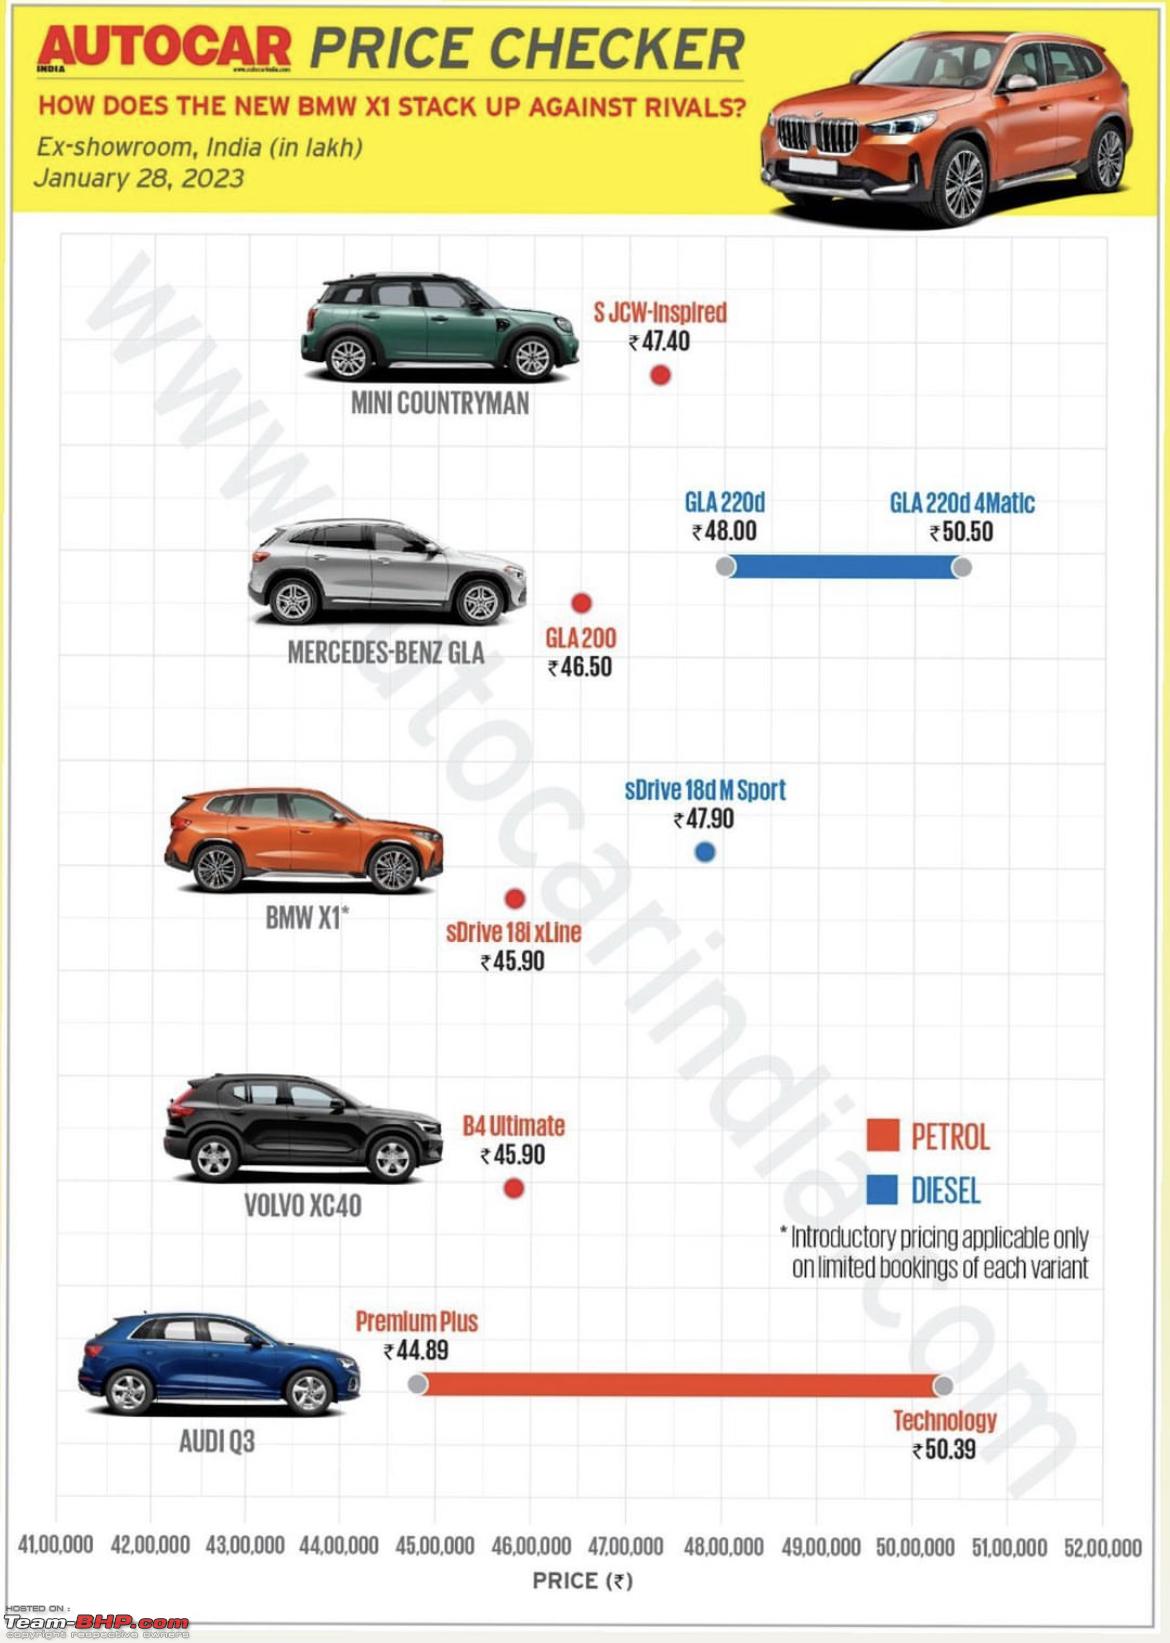 Next-gen BMW X1, now launched at 45.90 lakhs! - Page 4 - Team-BHP